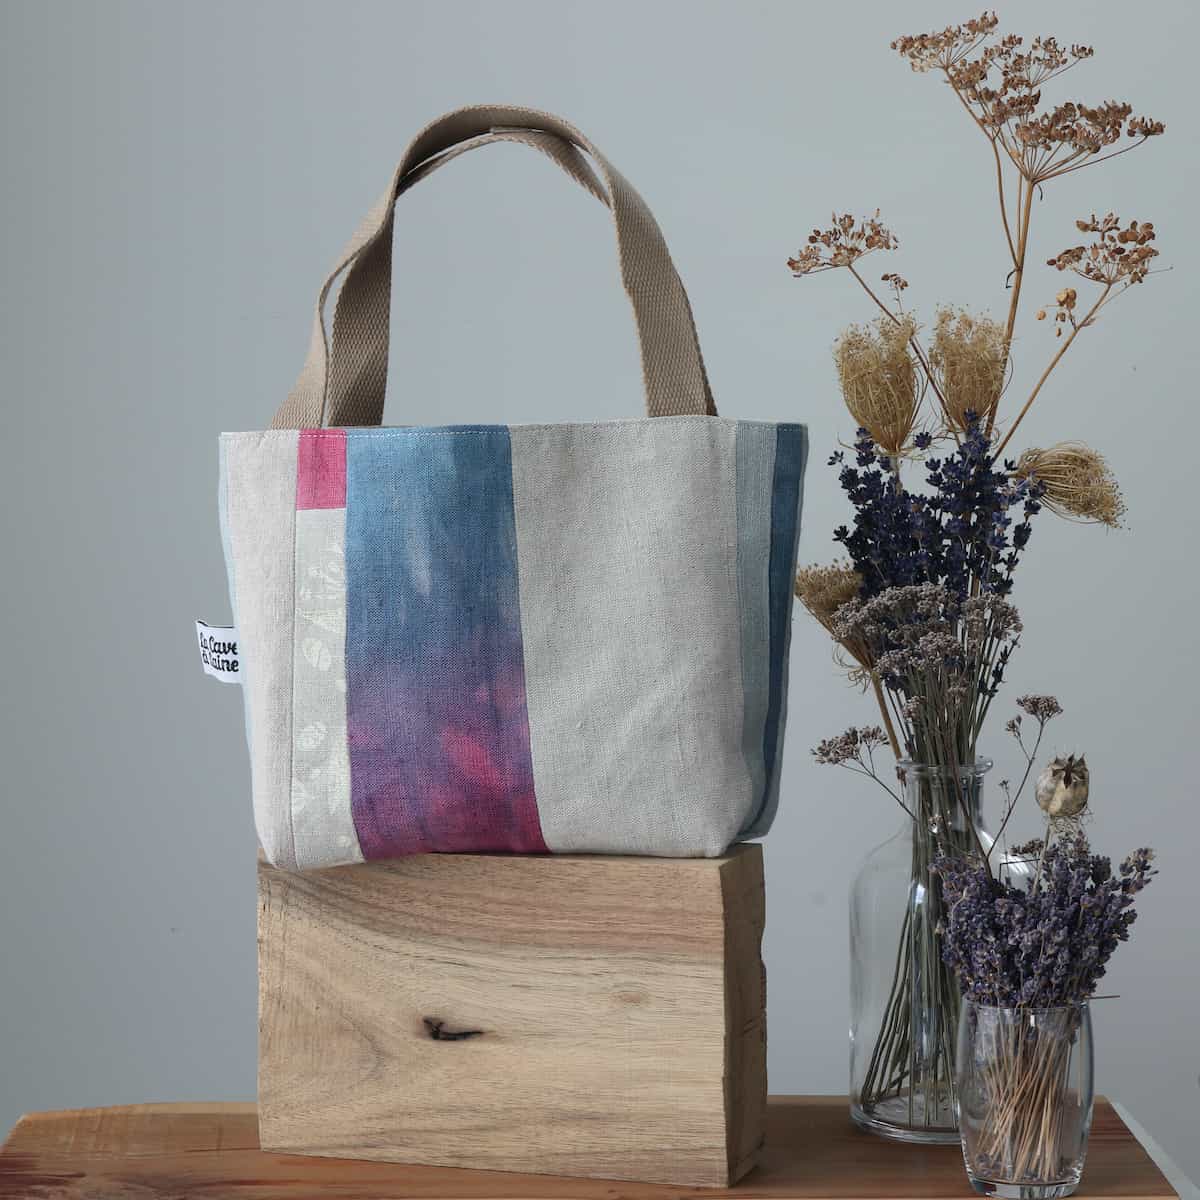 A white linen tote bag with a panel of blue and purple fabric.